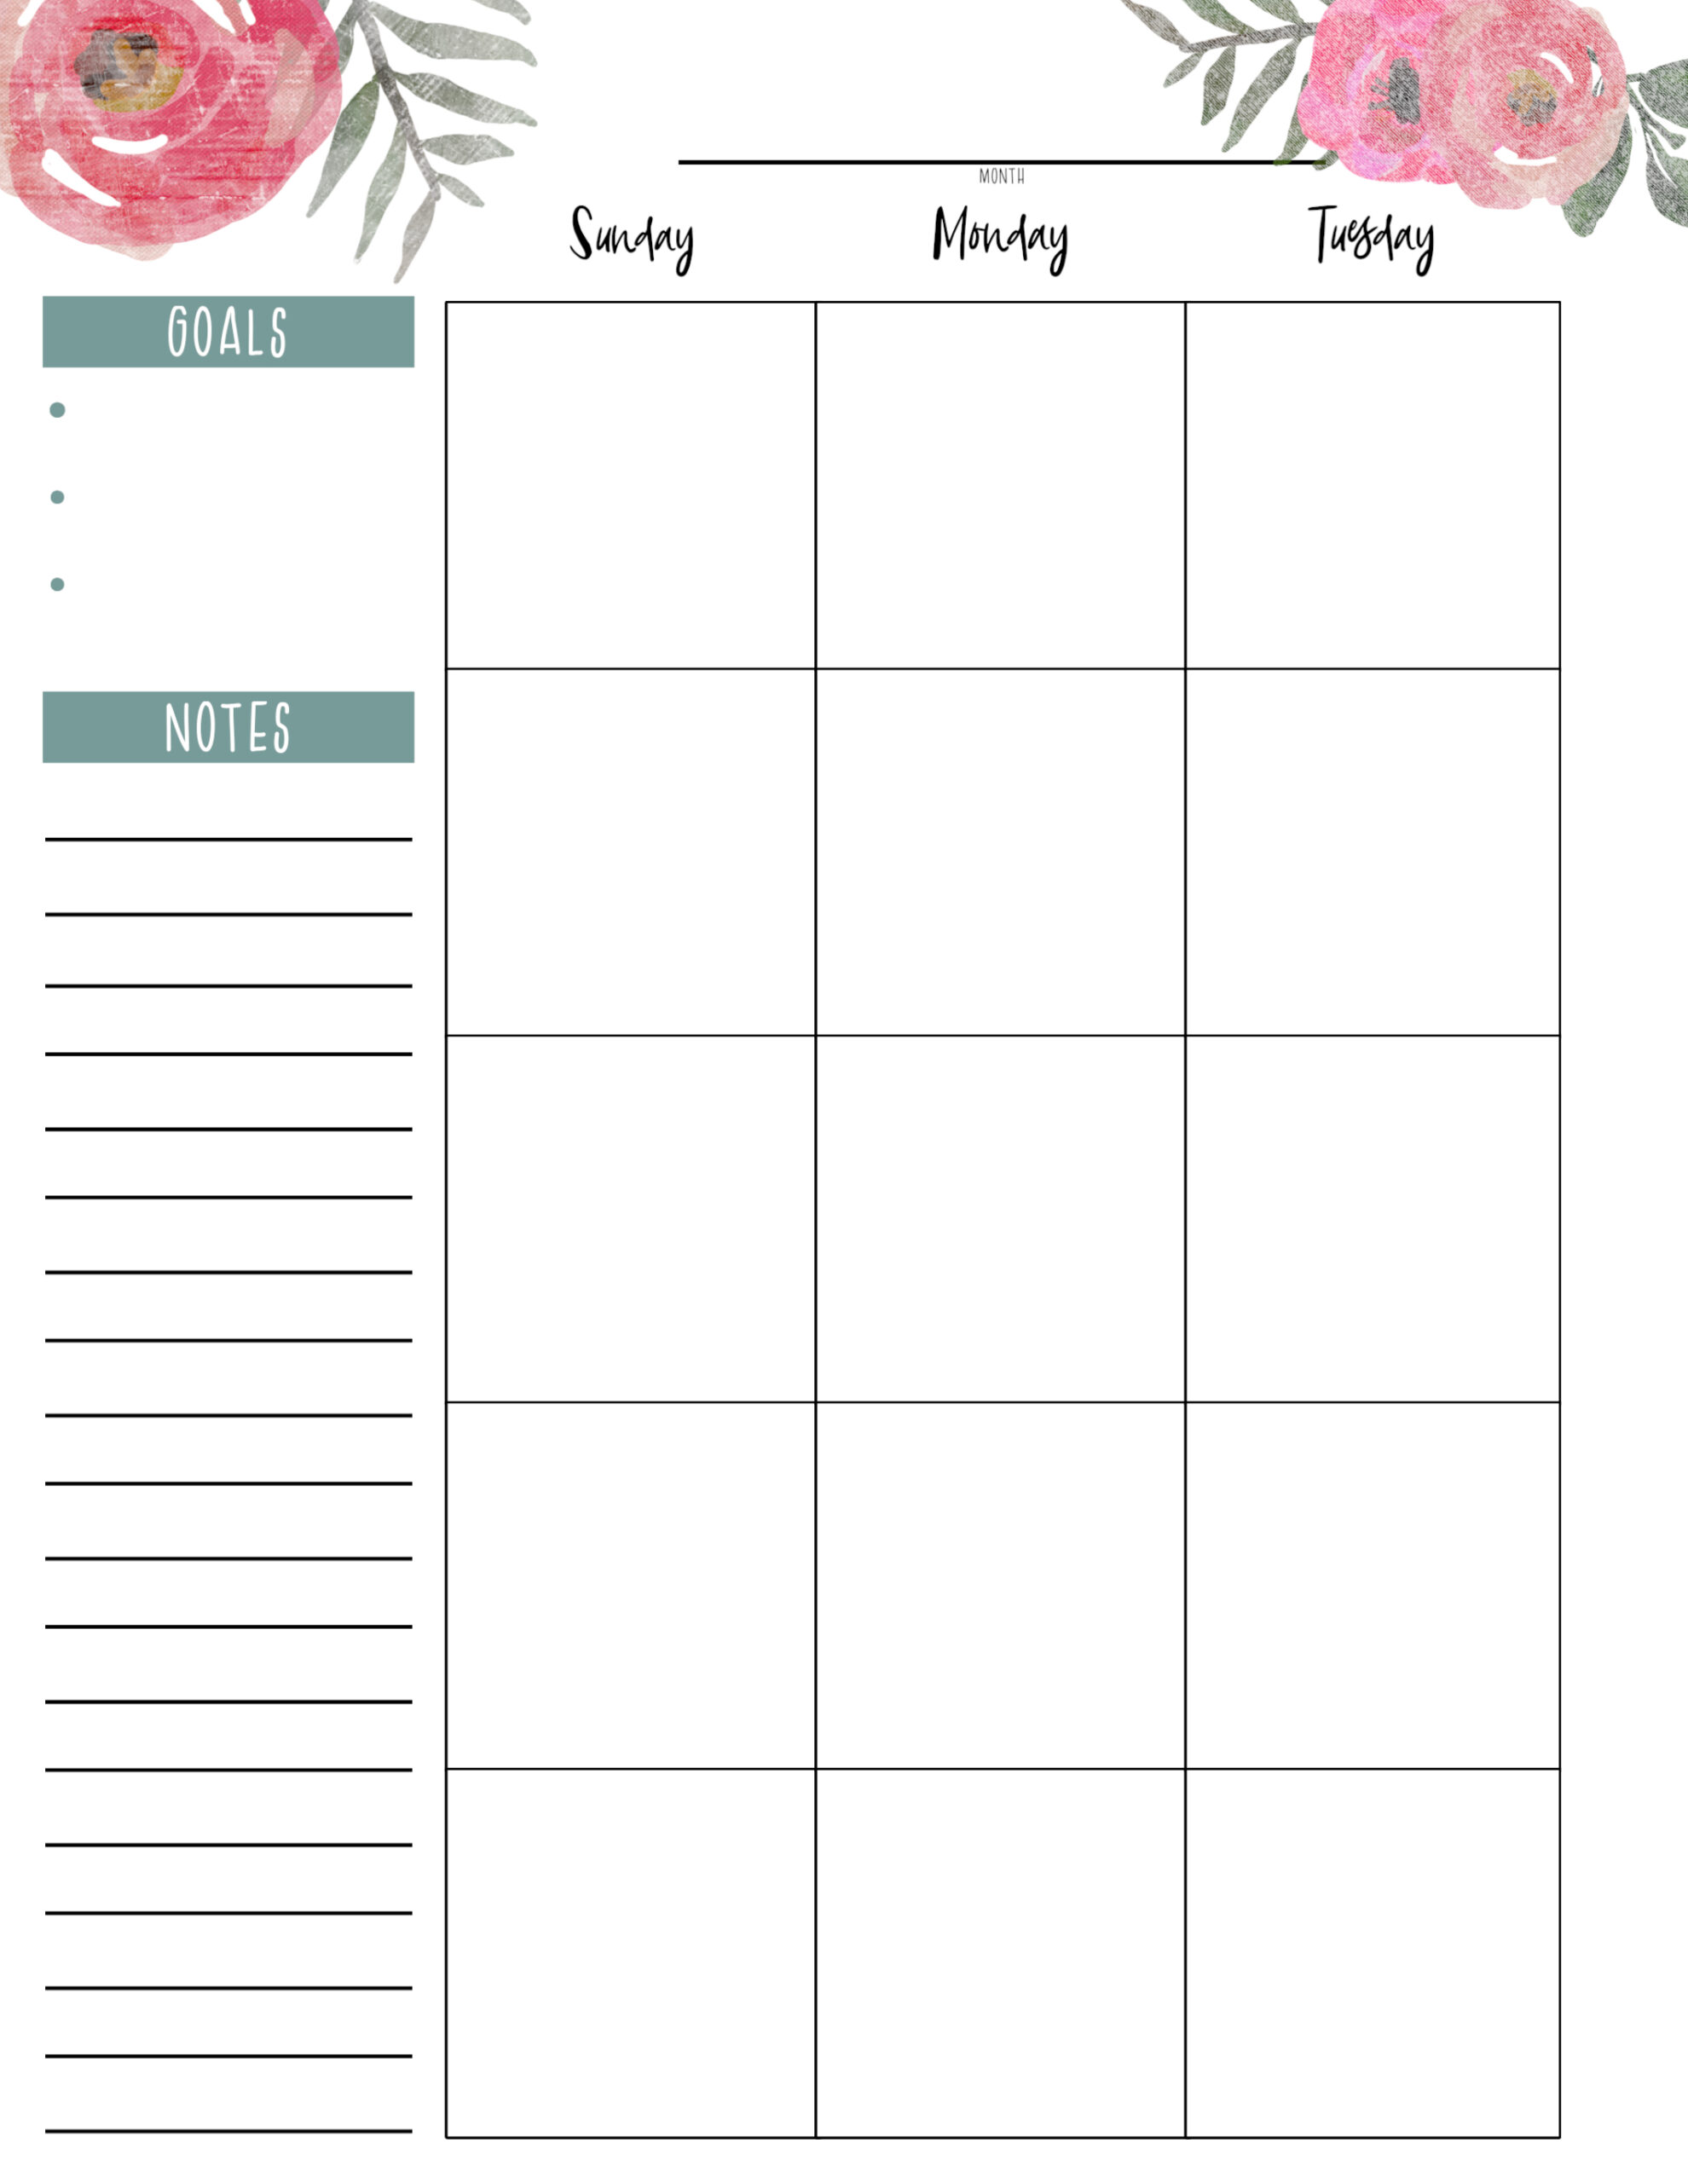 11-cute-printable-monthly-budget-worksheets-cute-and-free-monthly